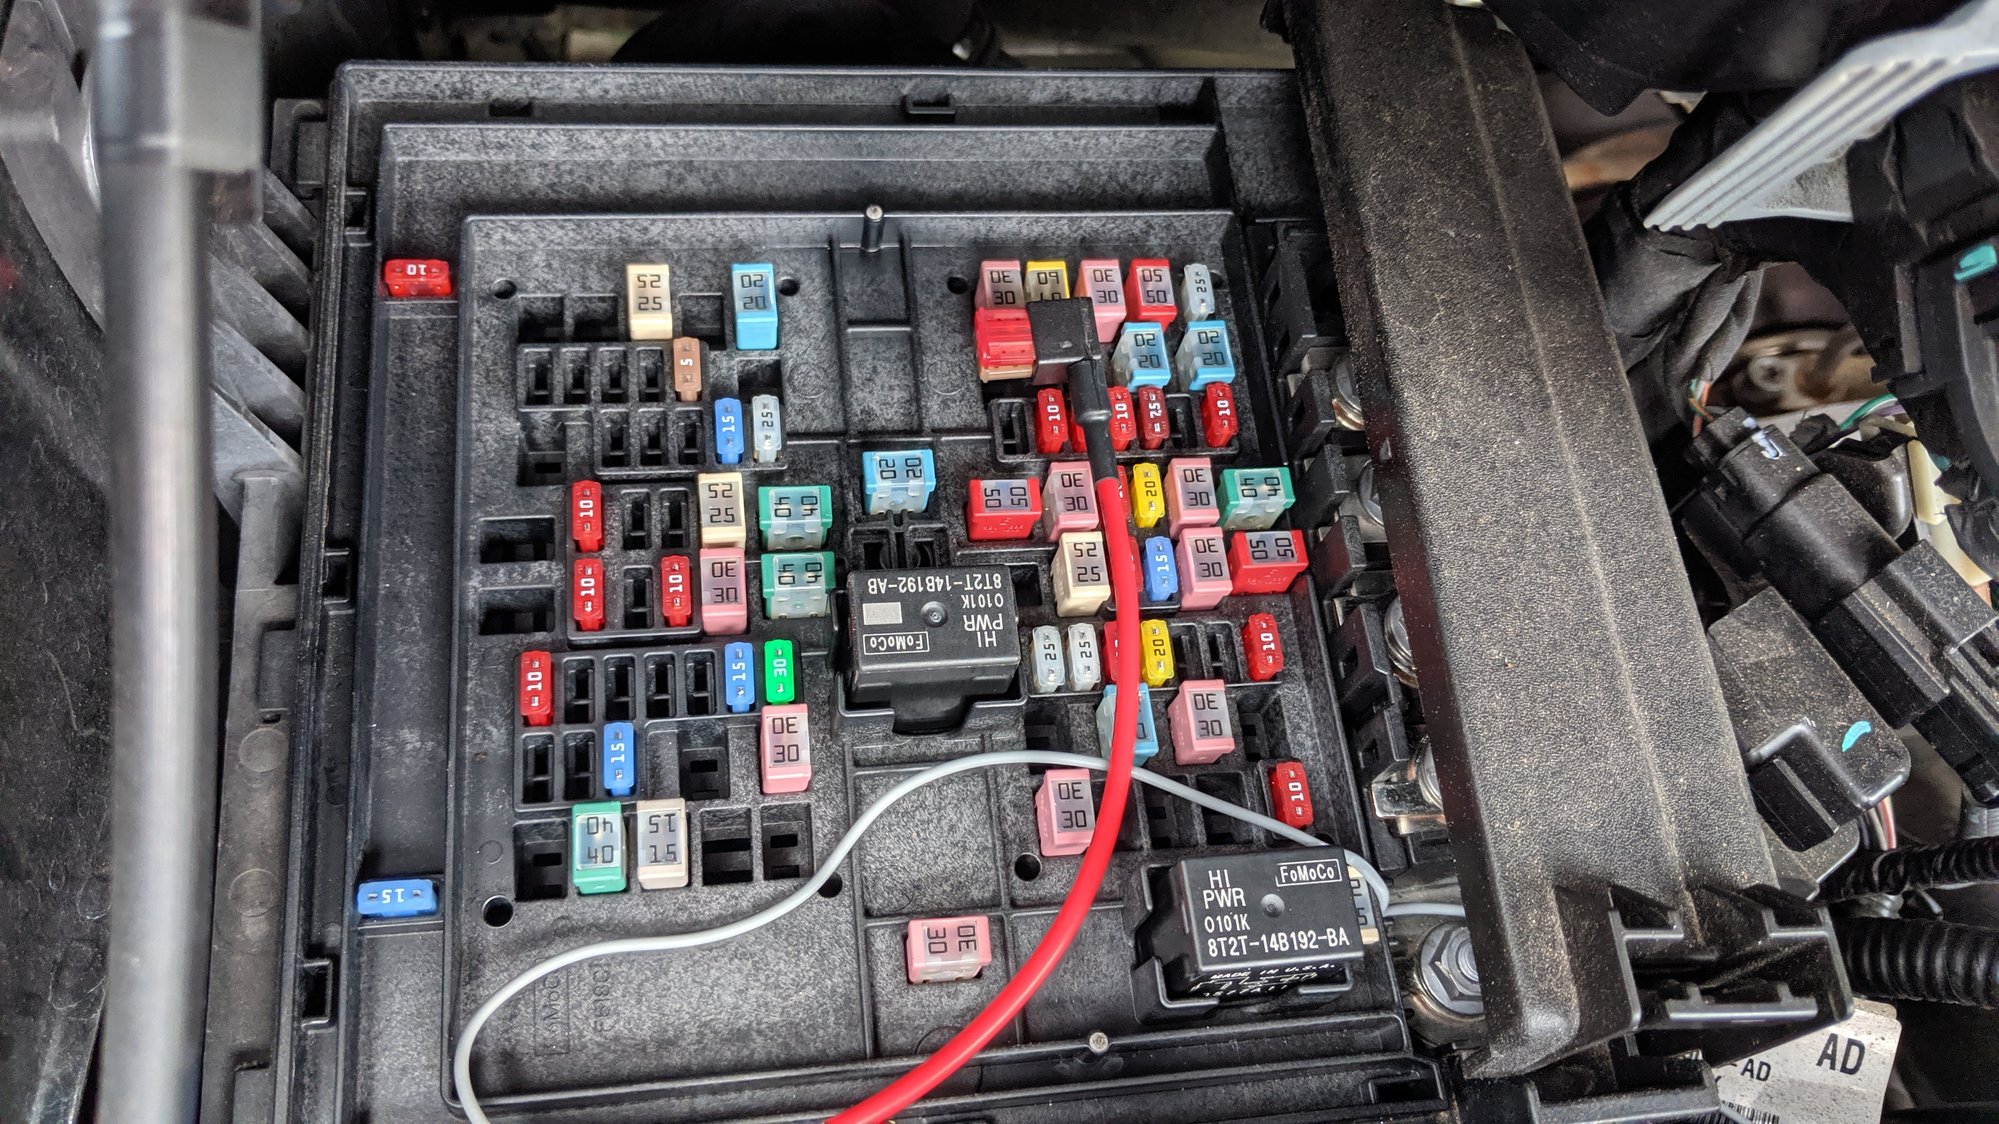 How To Replace/Install Fuse Box in 2018 F150 - Ford F150 ...